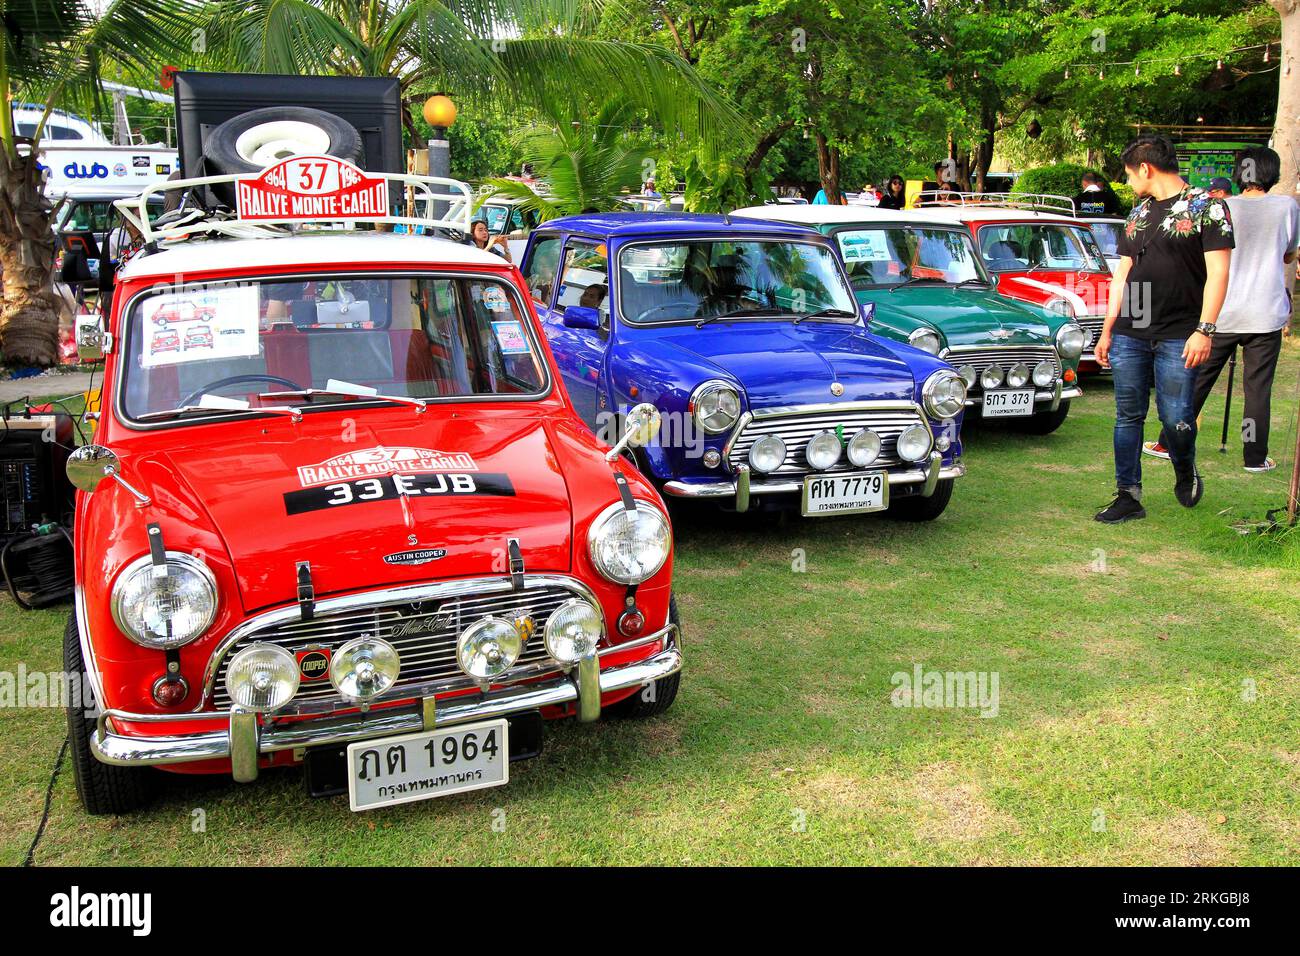 A classic Austin Mini Cooper car is parked on a grassy field in preparation for a Mini on the Beach party Stock Photo